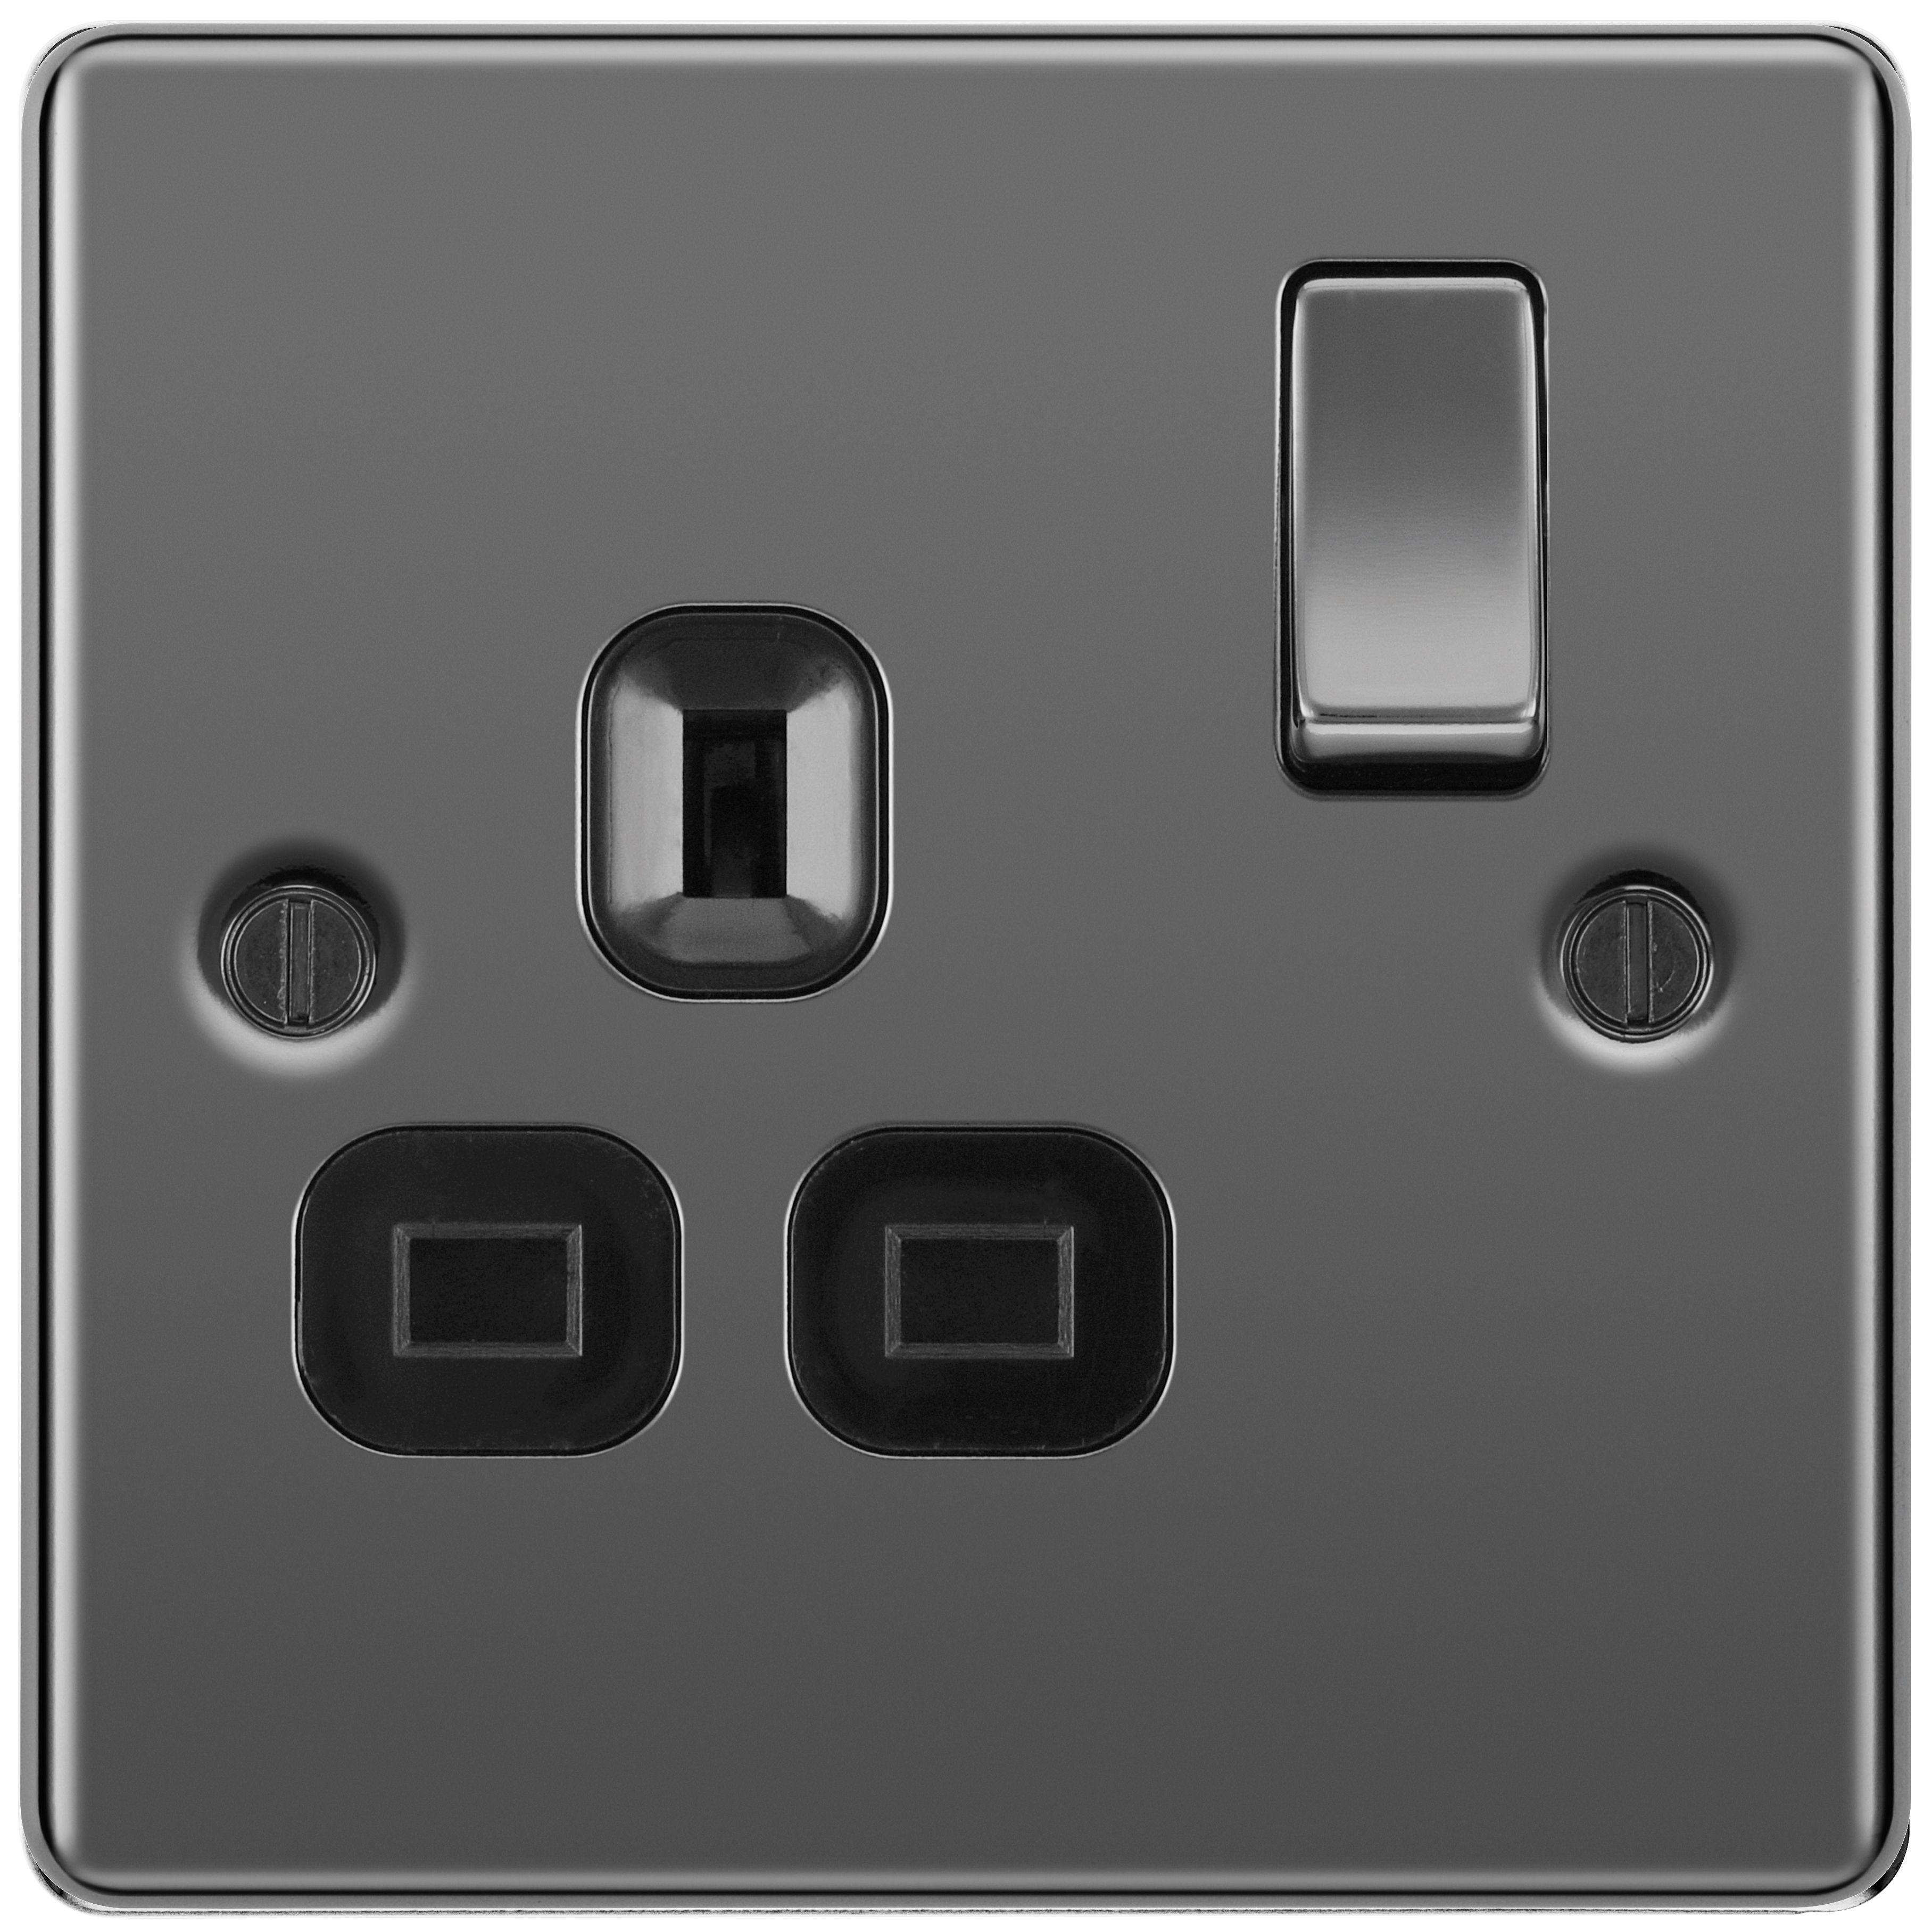 Image of BG 13A Screwed Raised Plate Single Switched Power Socket Double Pole - Black Nickel